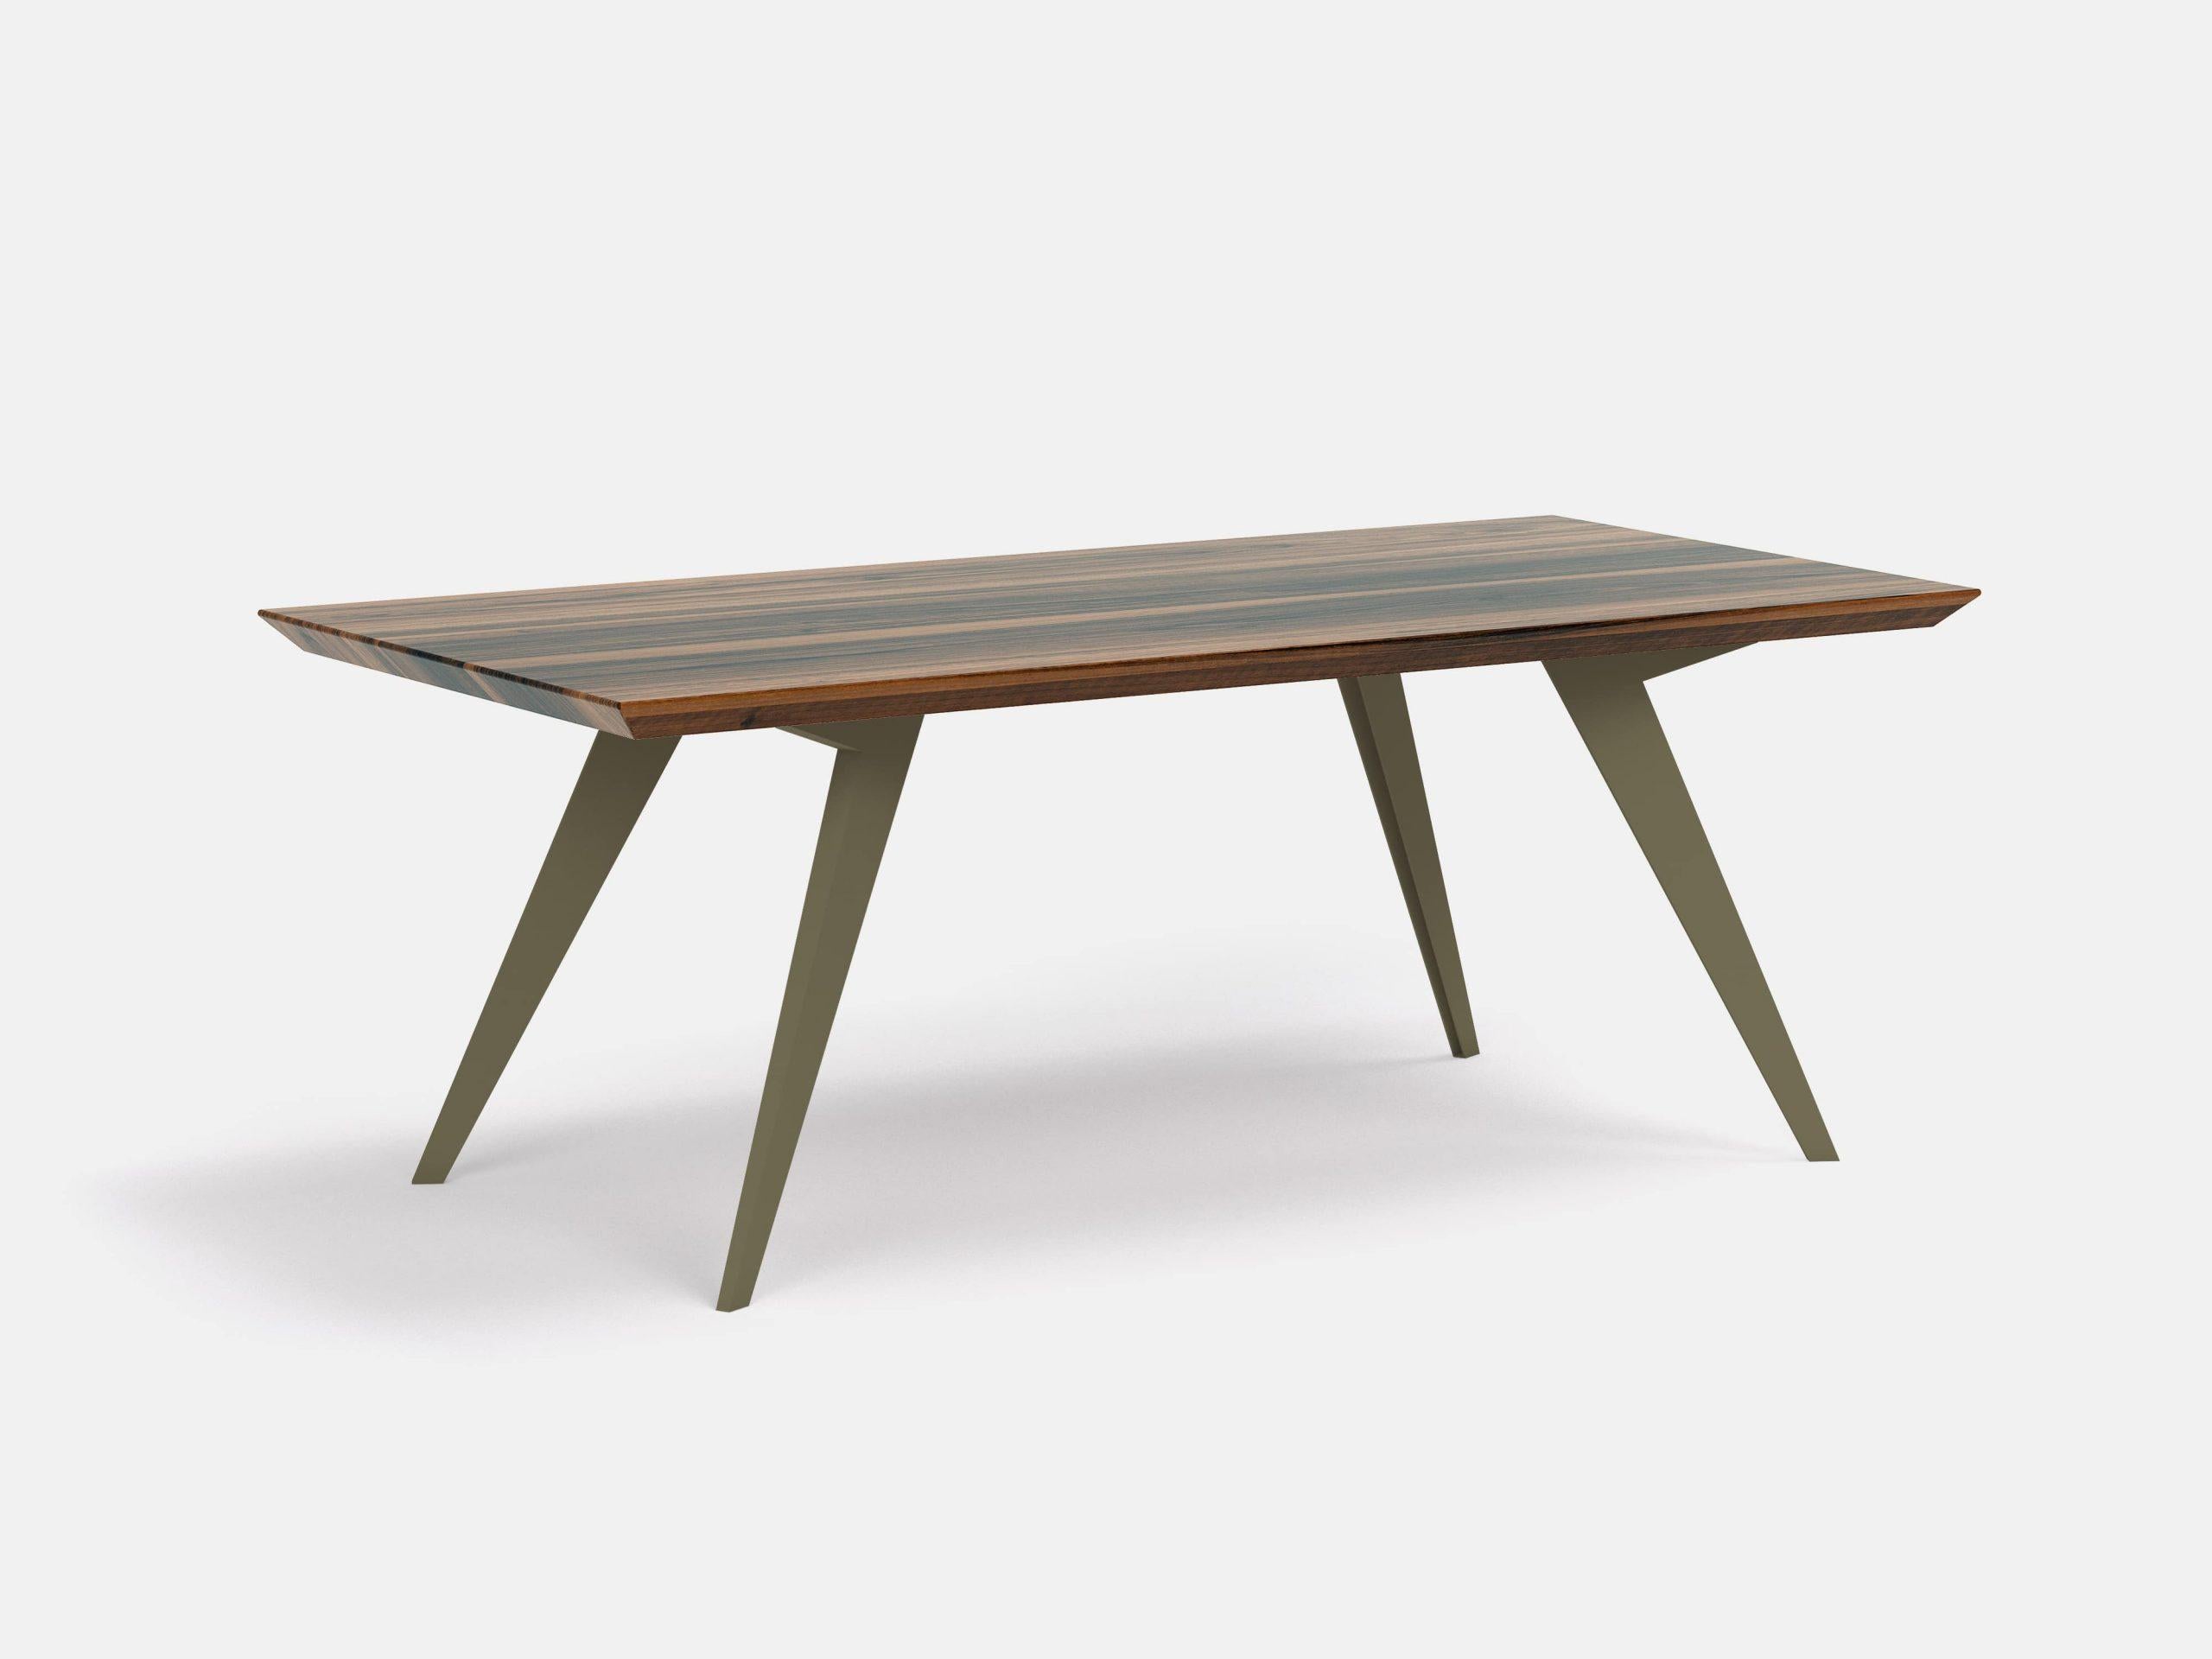 Walnut and steel Minimalist 400 dining table 
Dimensions: W 400 x D 100 x H 75 cm
Materials: American walnut 100% solid wood, steel legs

Dimensions available: 160, 200, 250, 300, 350, 400 cm

Roly-Poly table is the proof that through design